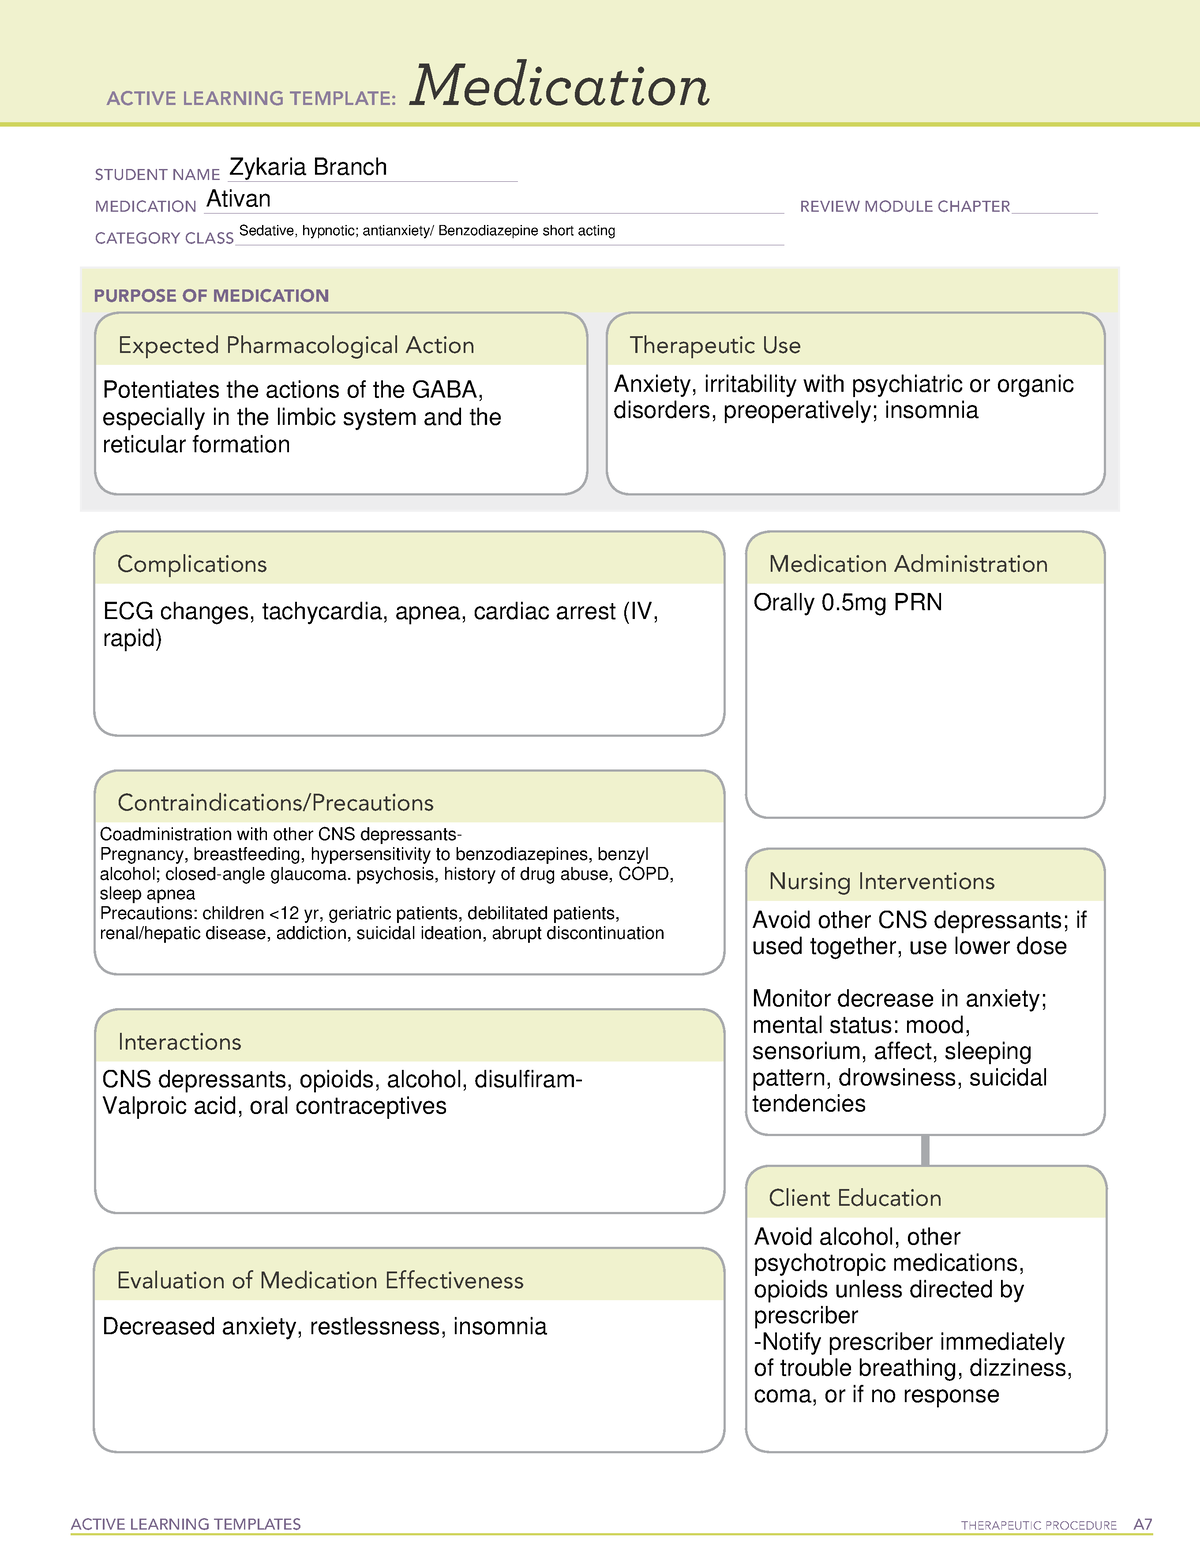 ativan-med-template-7-active-learning-templates-therapeutic-procedure